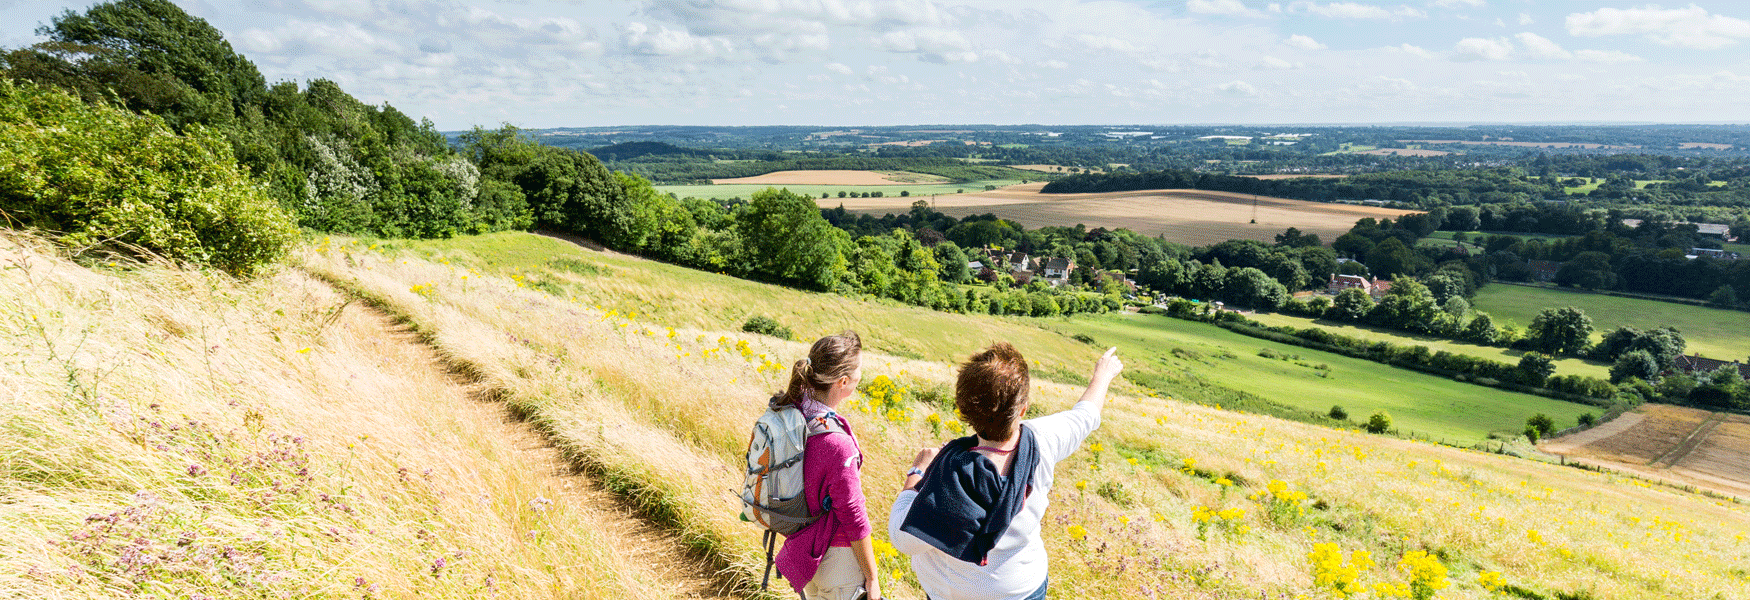 Walkers on the North Downs Way Near Maidstone